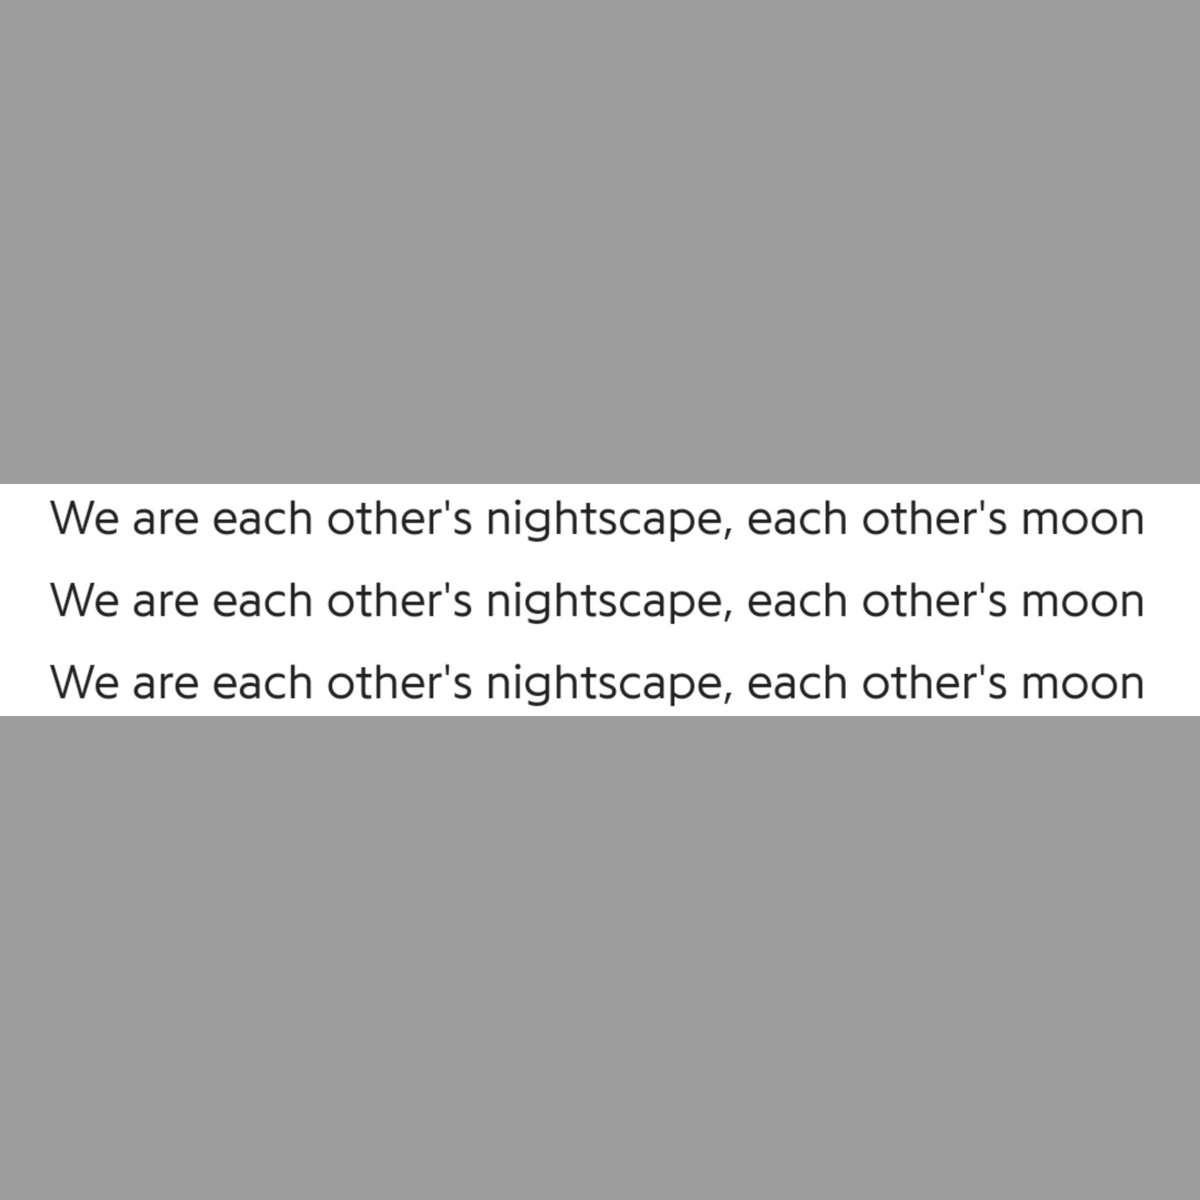 Each other's strength n support, our darkness is mutual, so we gotta support each other when self support doesn't suffice, until we eventually become strong, to be there for ourselves. He is comforting us moonchilds that we will rise n shine when the moon rises, that we+